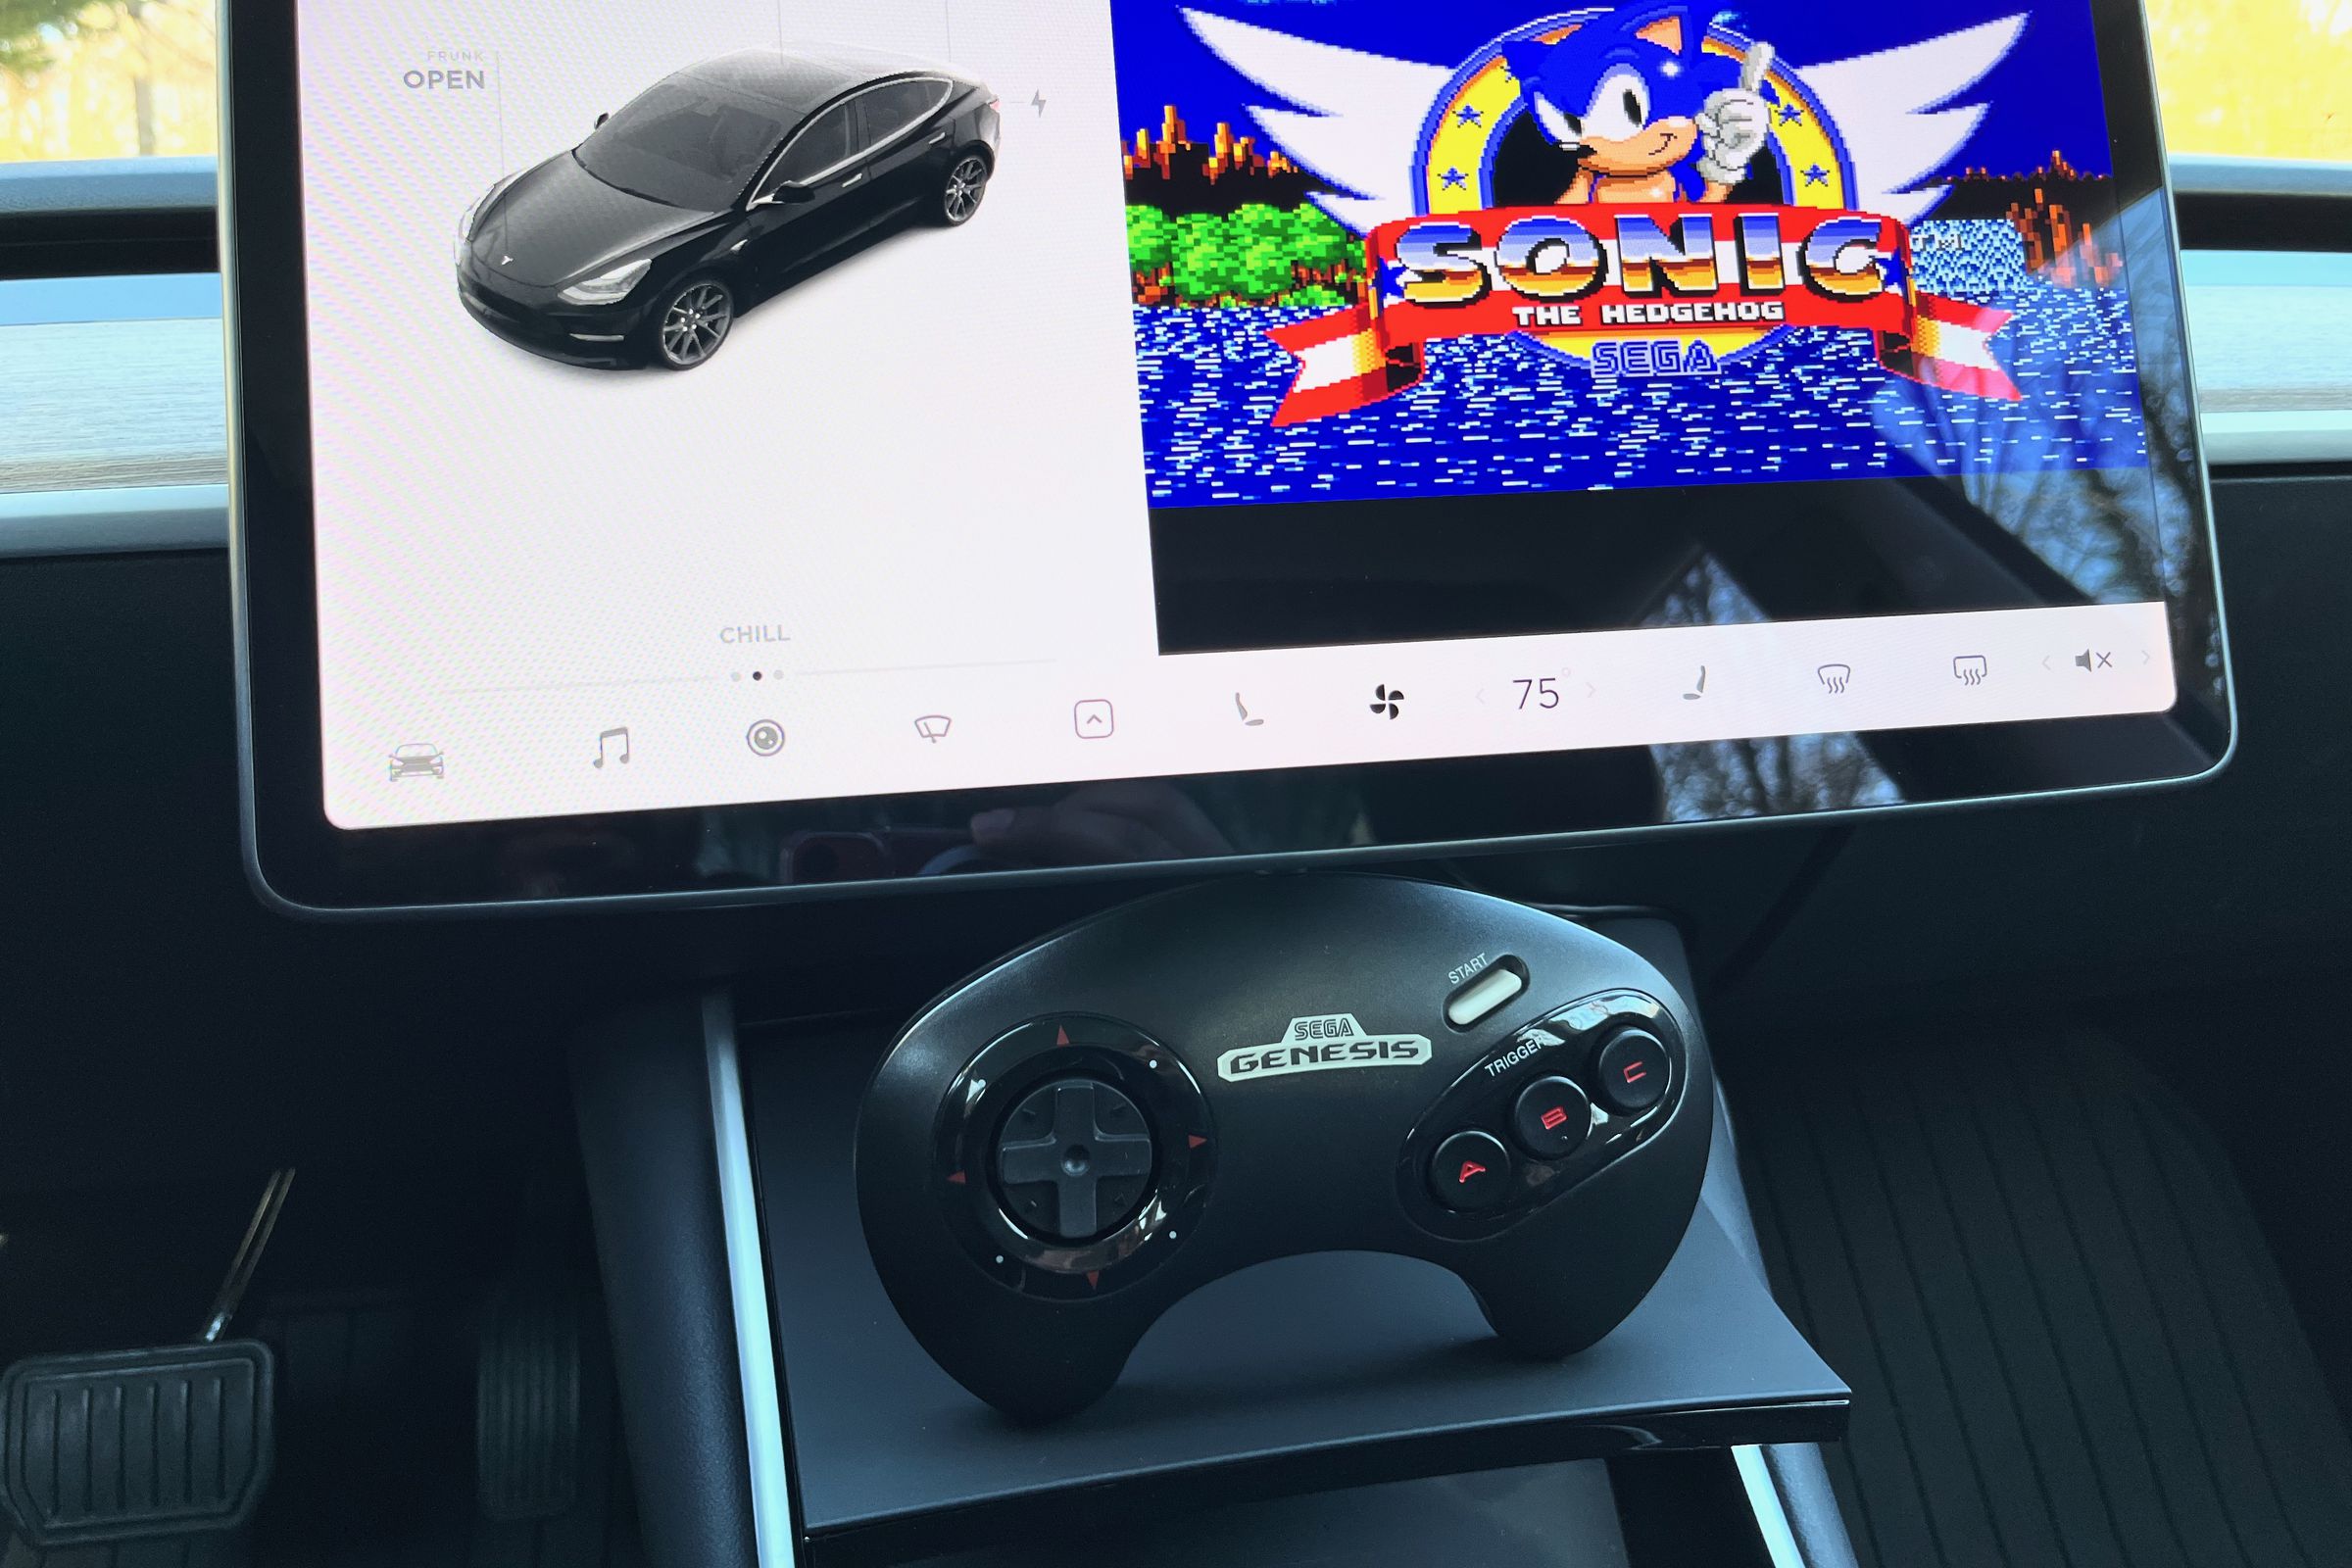 The Tesla Model 3 interior is displayed with a Sega Genesis game controller sitting under the infotainment screen with a window on the screen showing the game Sonic 1.